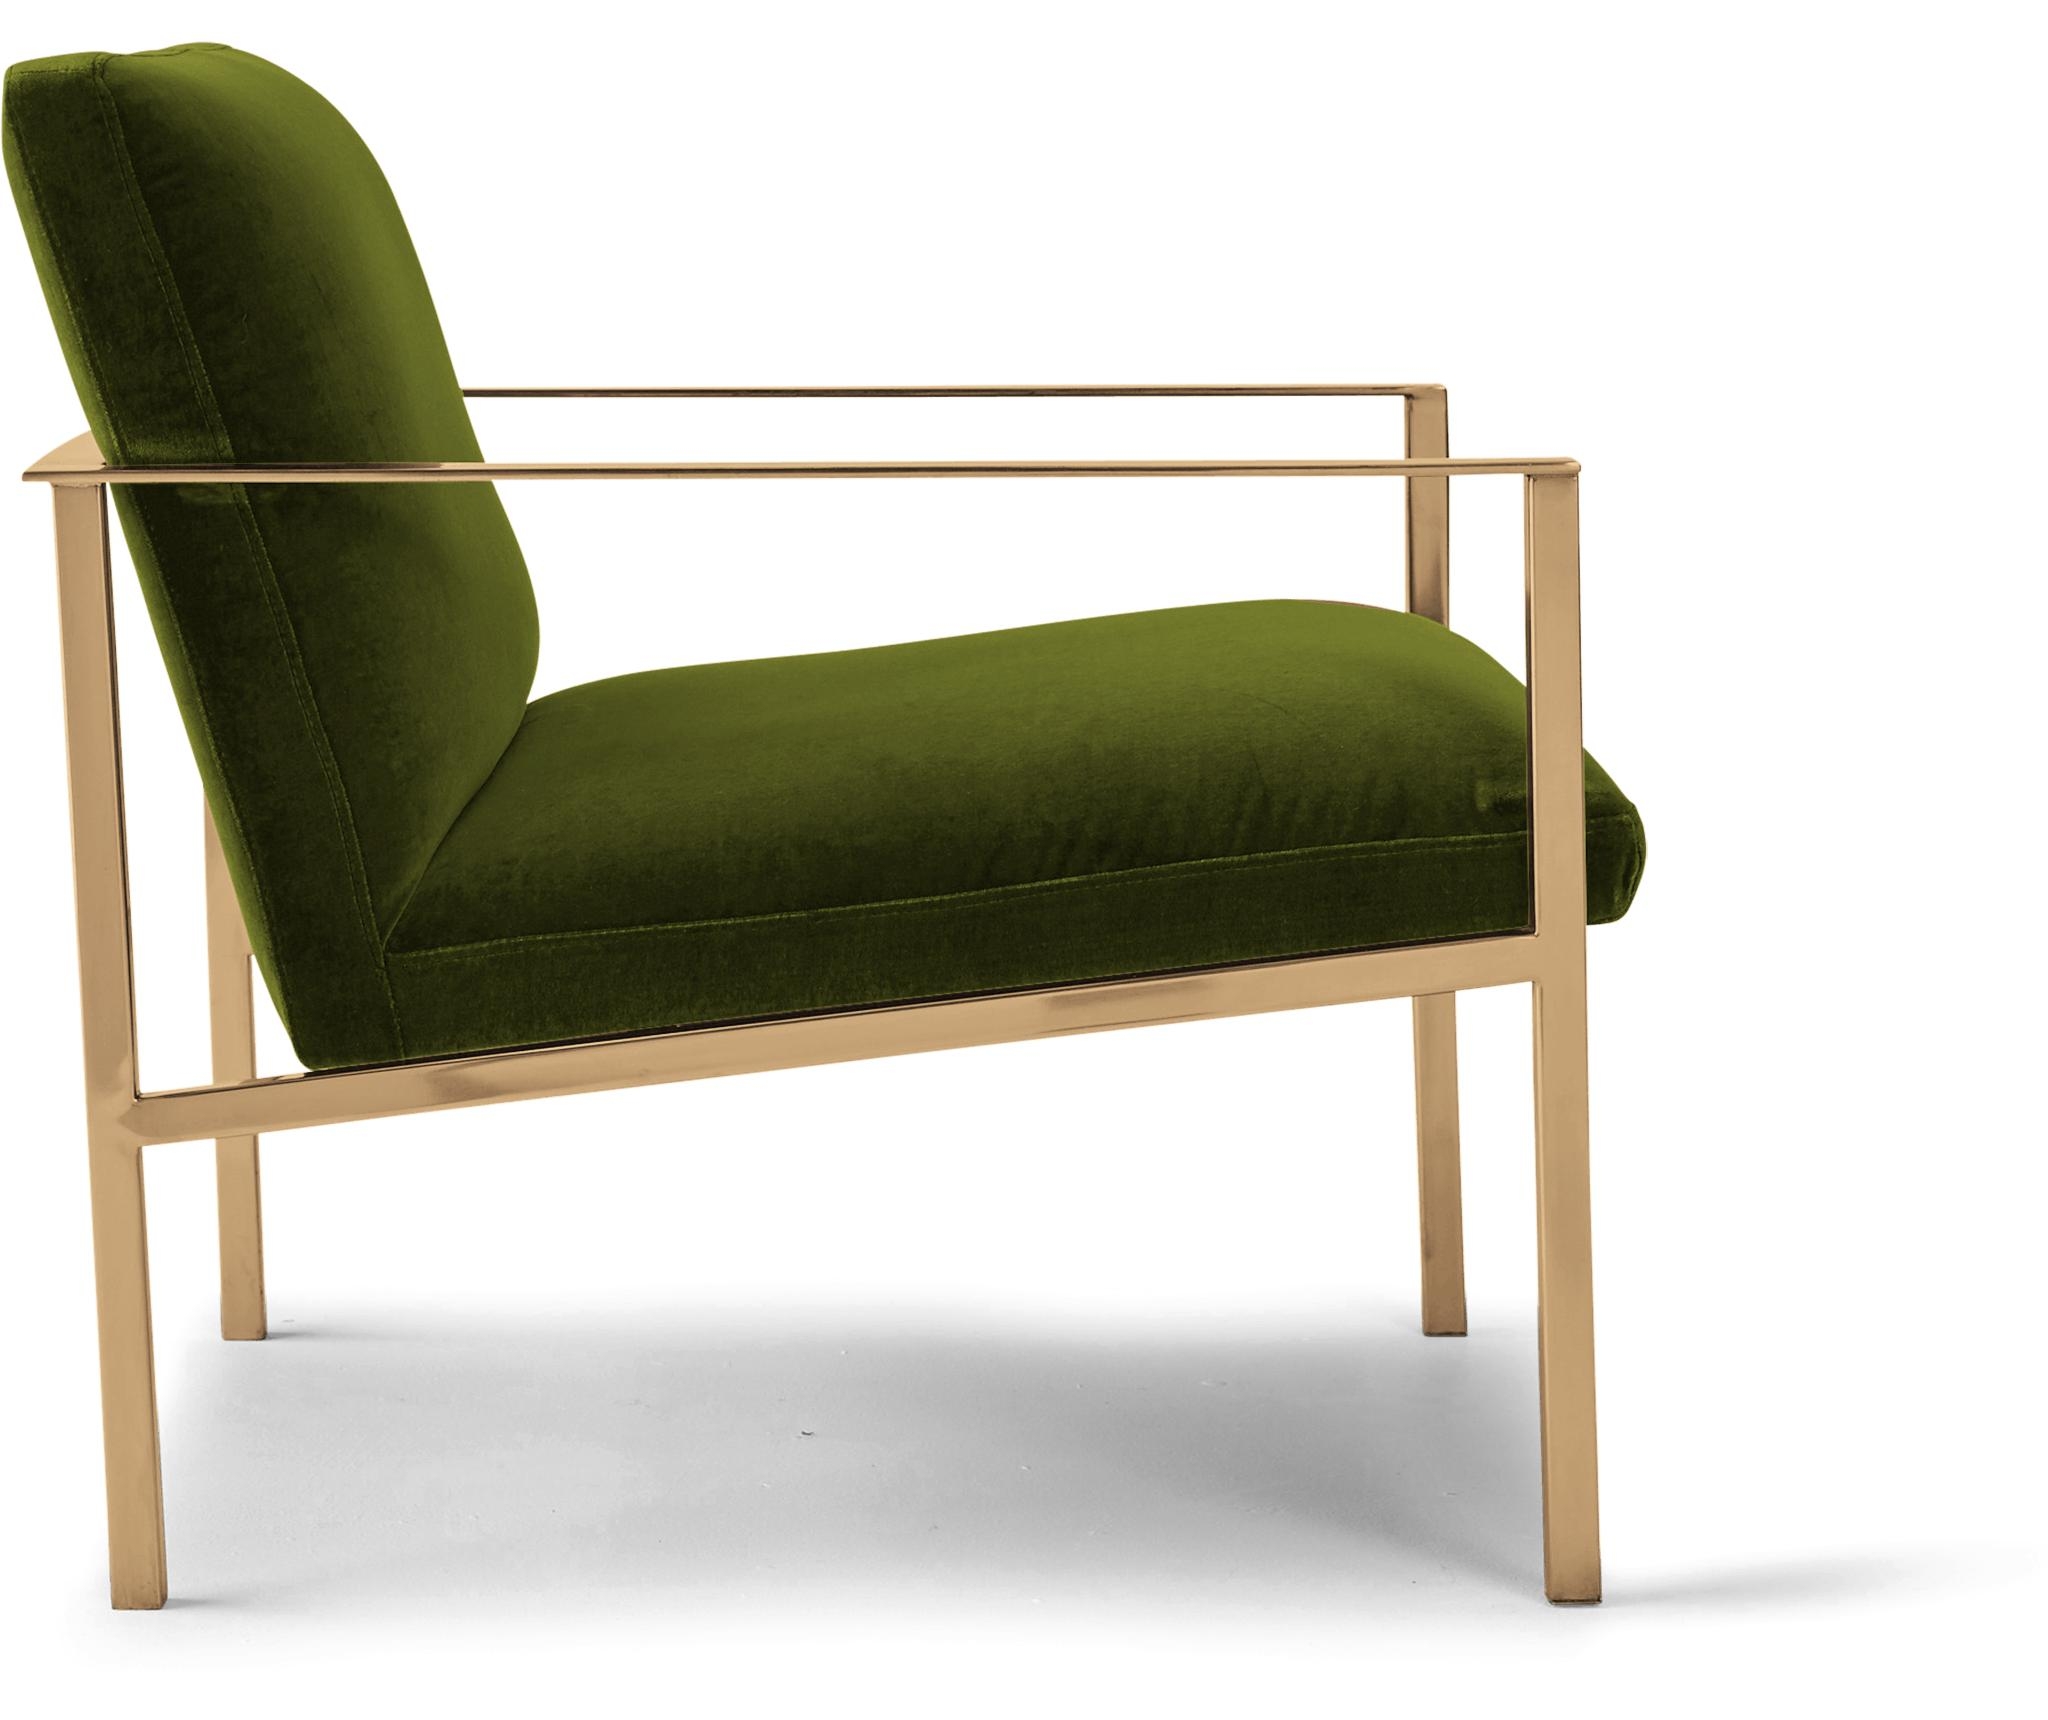 Green Orla Mid Century Modern Accent Chair - Royale Apple - Image 2